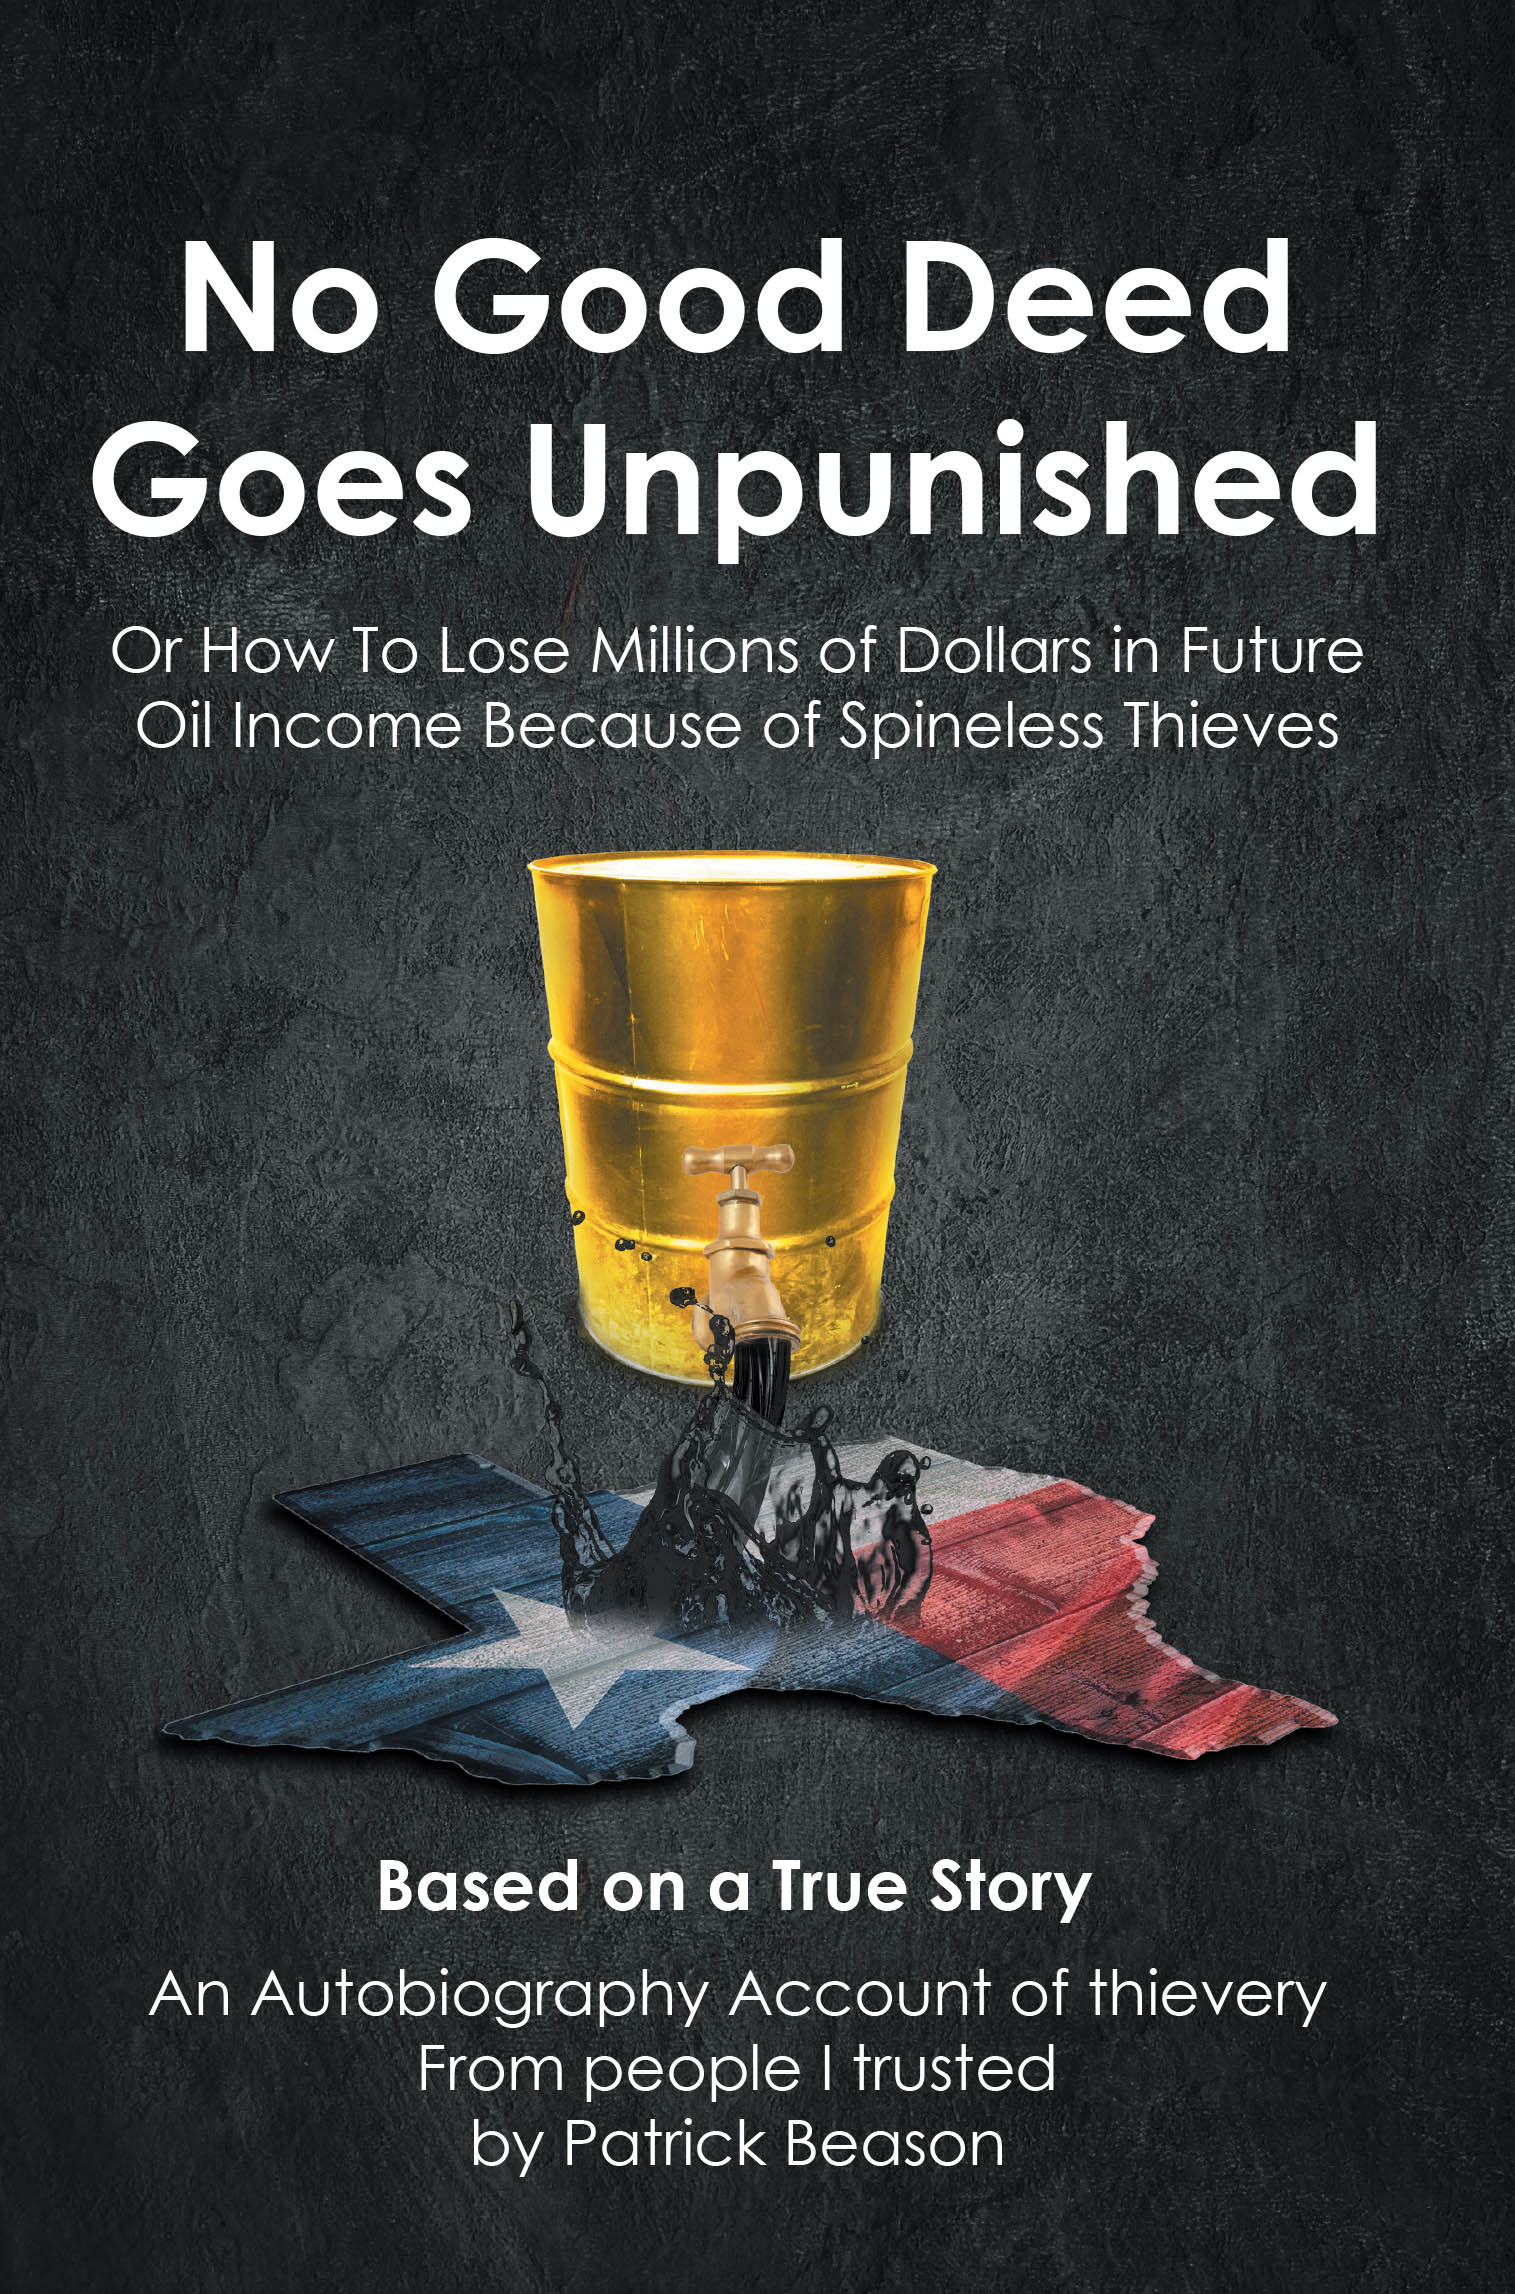 Author Patrick Beason’s New Book, “No Good Deed Goes Unpunished: Or How to Lose Millions of Dollars in Future Oil Income because of Spineless Thieves,” is Released